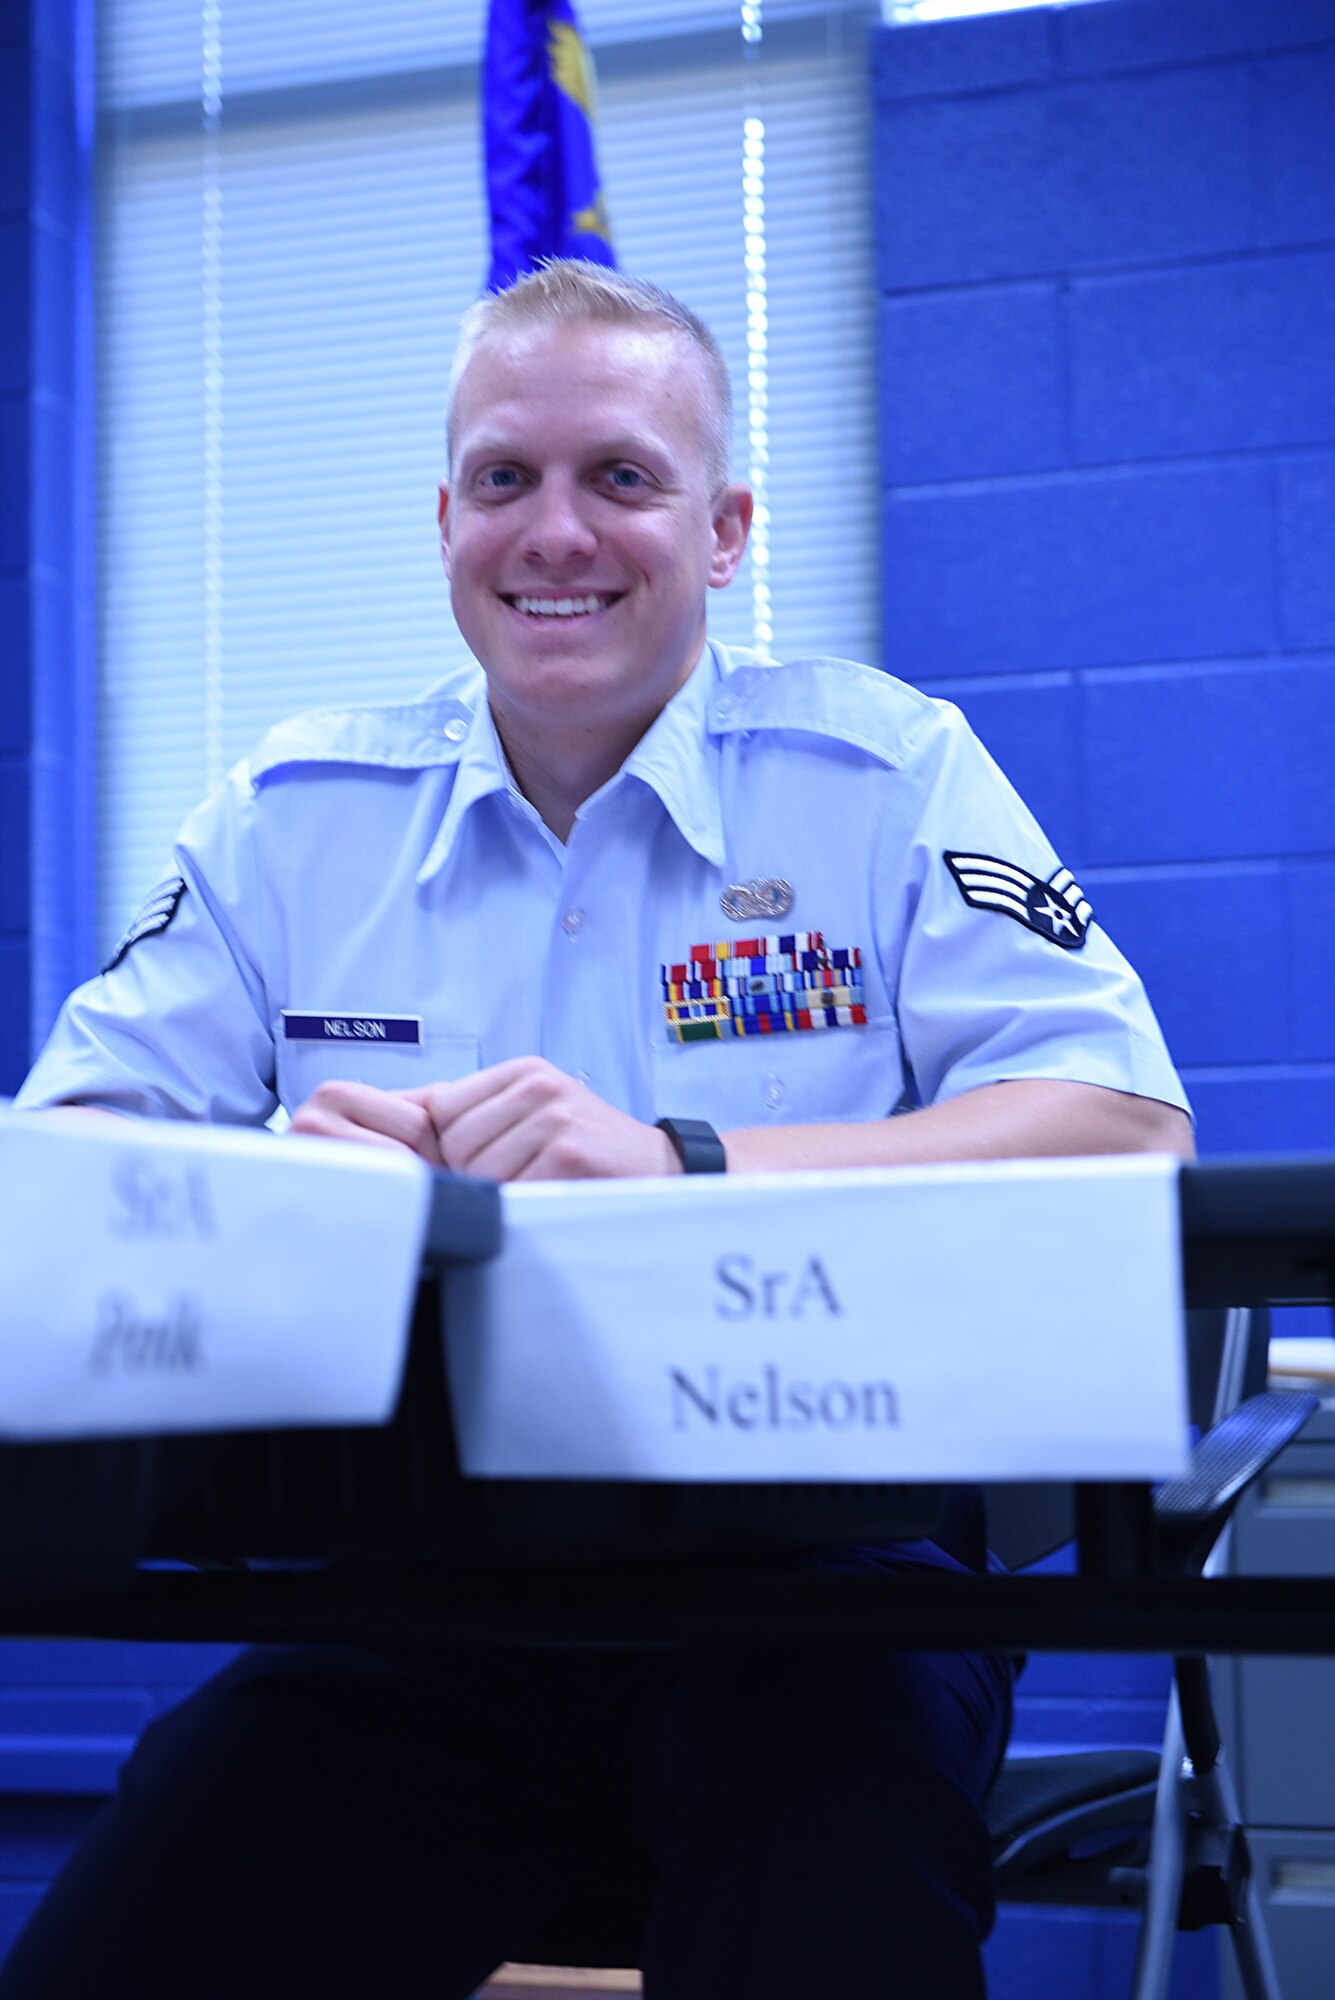 U.S. Air Force Airmen attend class during Airman leadership school June 21, 2016, at the Chief Master Sergeant Paul H. Lankford Enlisted Professional Military Education Center at McGhee Tyson Air National Guard Base in Louisville, Tenn. (U.S. Air National Guard photo by Master Sgt. Mike R. Smith/Released)